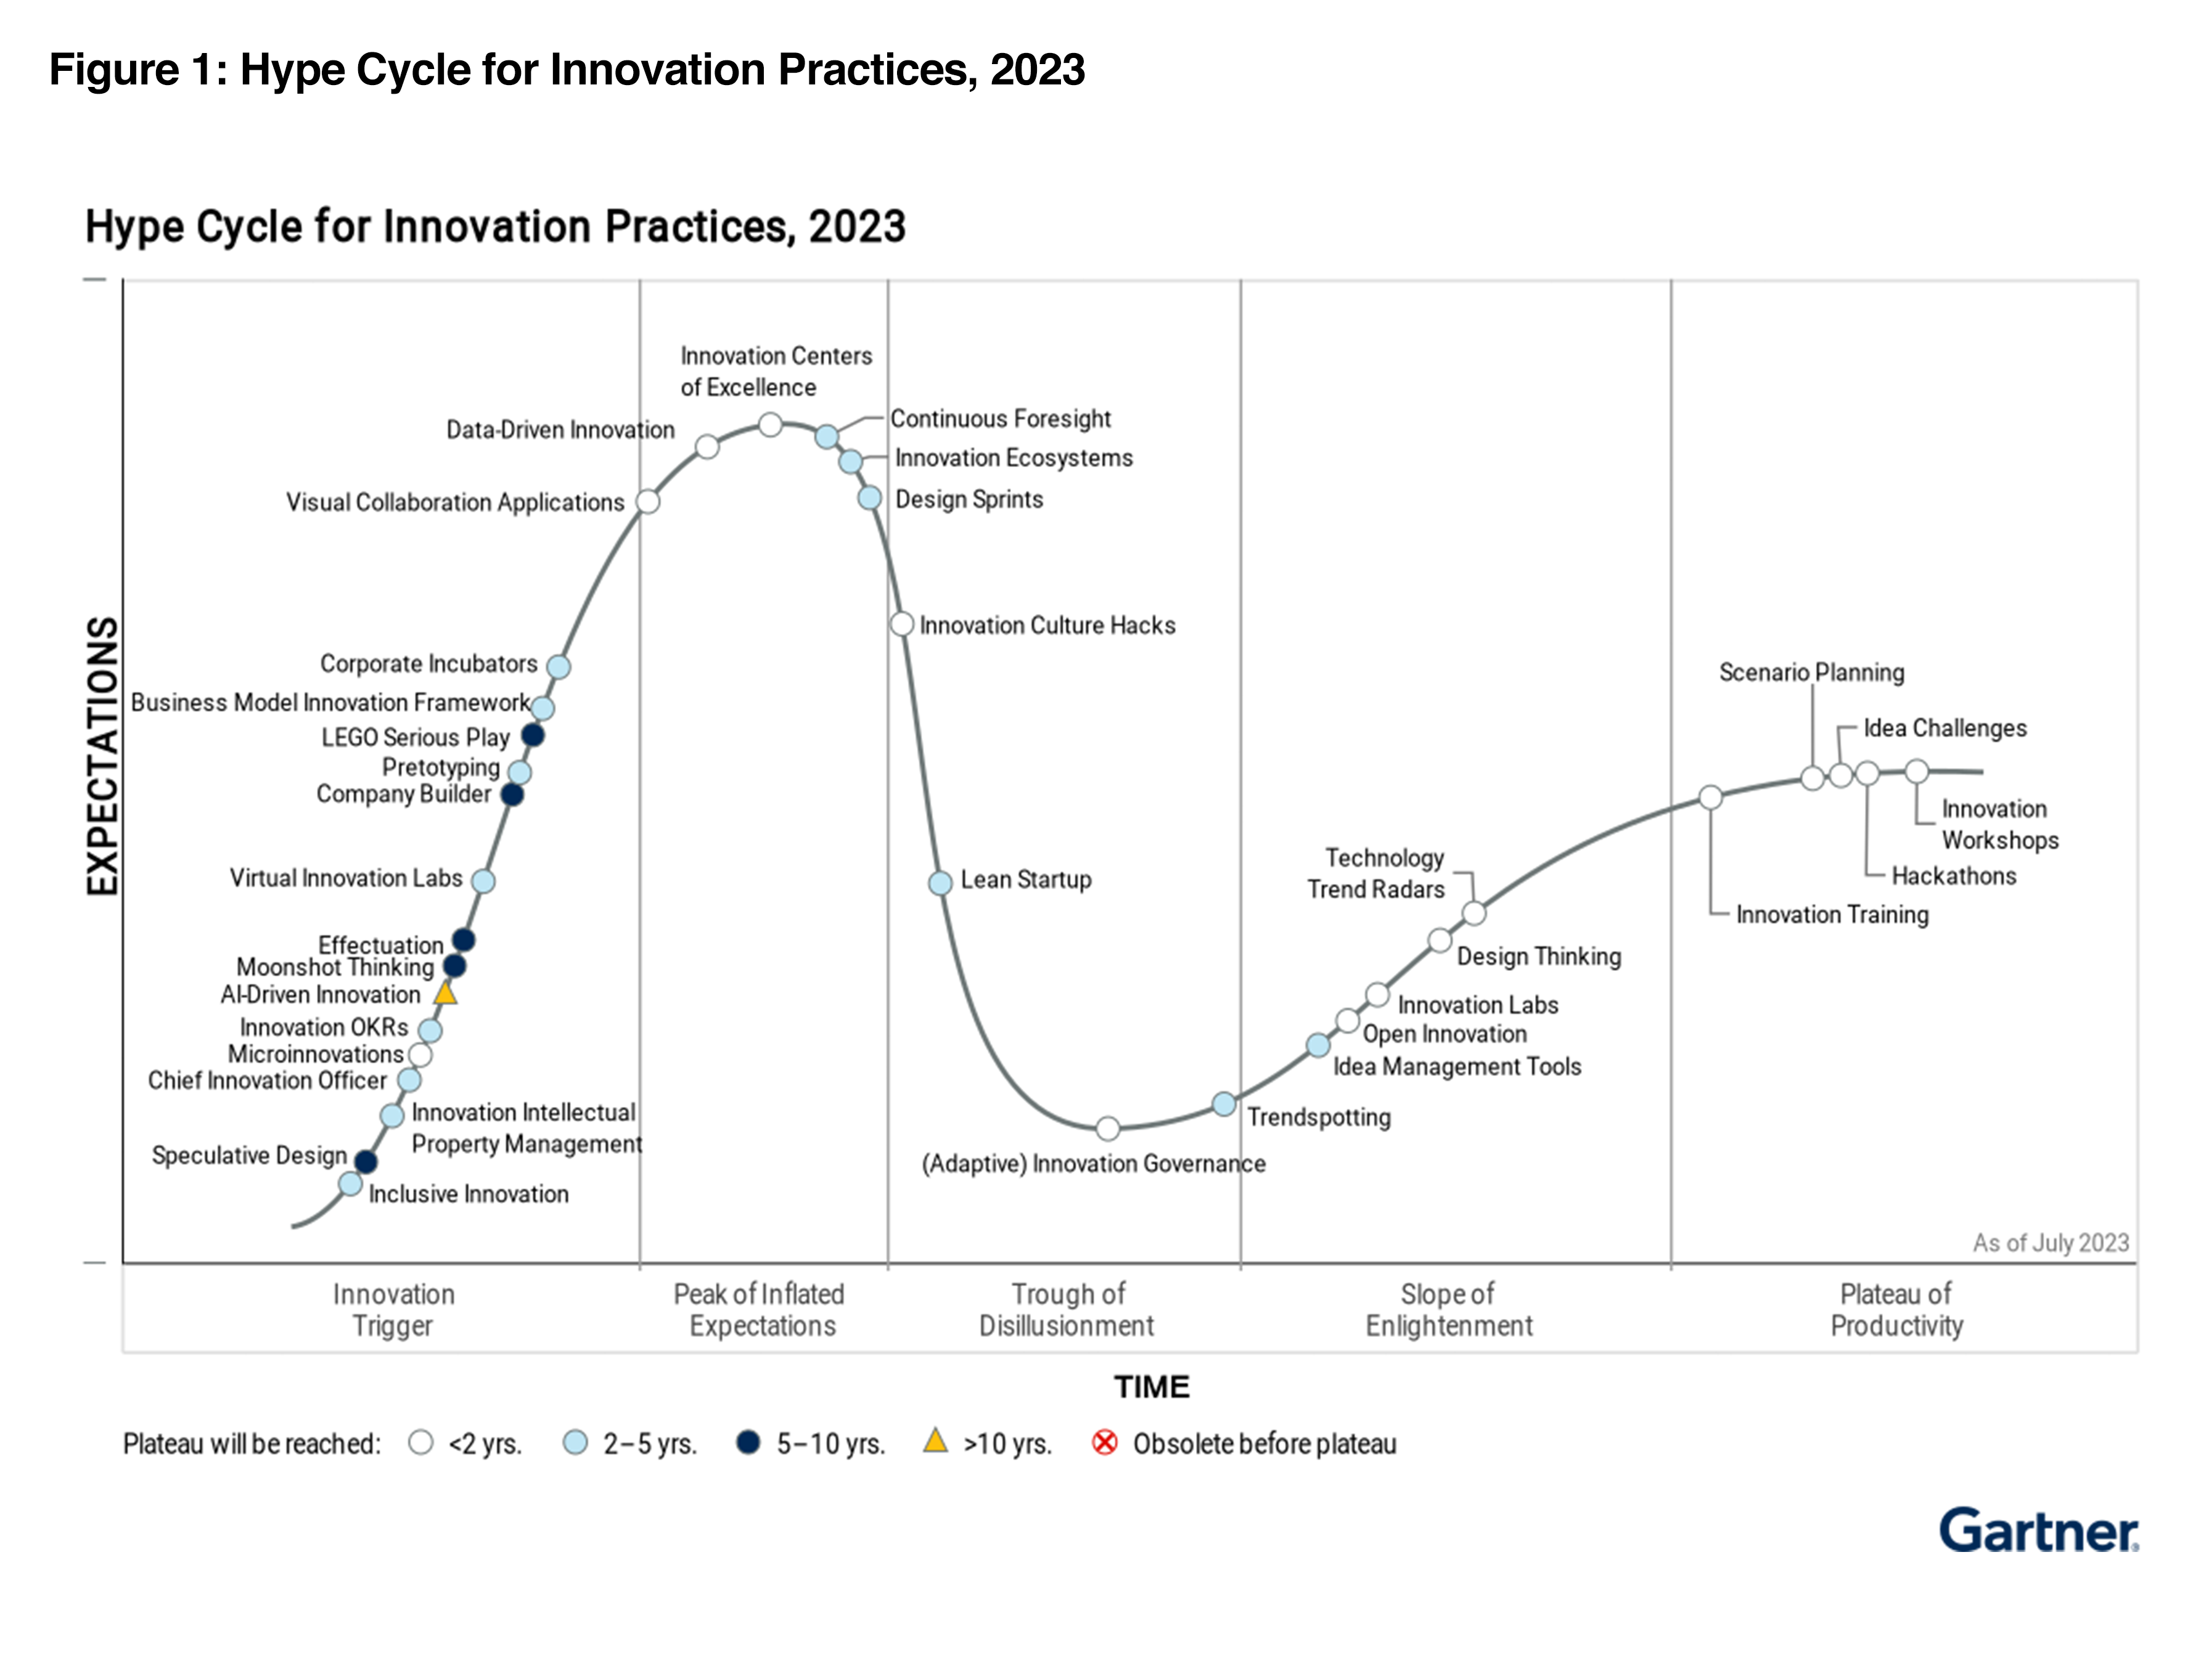 Gartner Hype Cycle for Innovation Practices, 2023